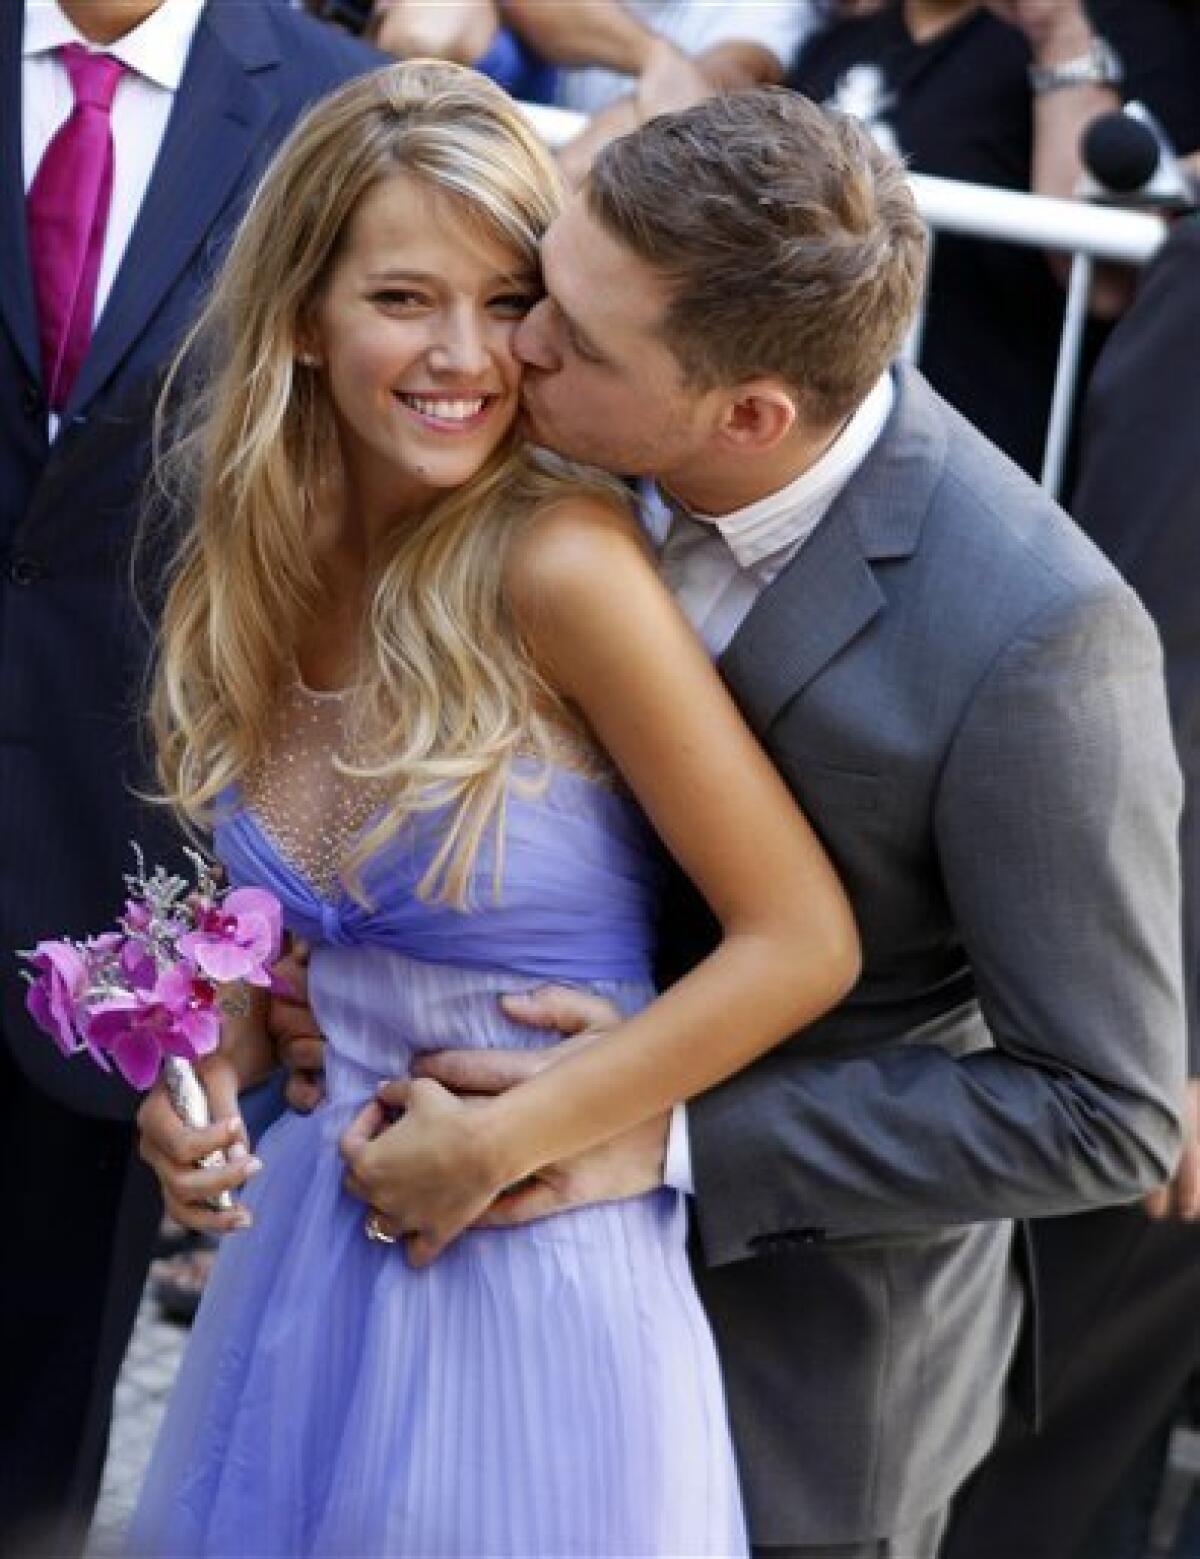 Canadian pop star Michael Buble kisses his bride Argentine TV actress Luisana Lopilato after their brief civil wedding in Buenos Aires, Argentina, Thursday March 31, 2011. The Grammy-winning singer of "Crazy Love" and his Argentine sweetheart posed for a mob of fans after tying the knot. They plan a full ceremony with 300 guests next month at a mansion outside Buenos Aires, followed by another wedding in Vancouver in April. (AP Photo/Natacha Pisarenko)